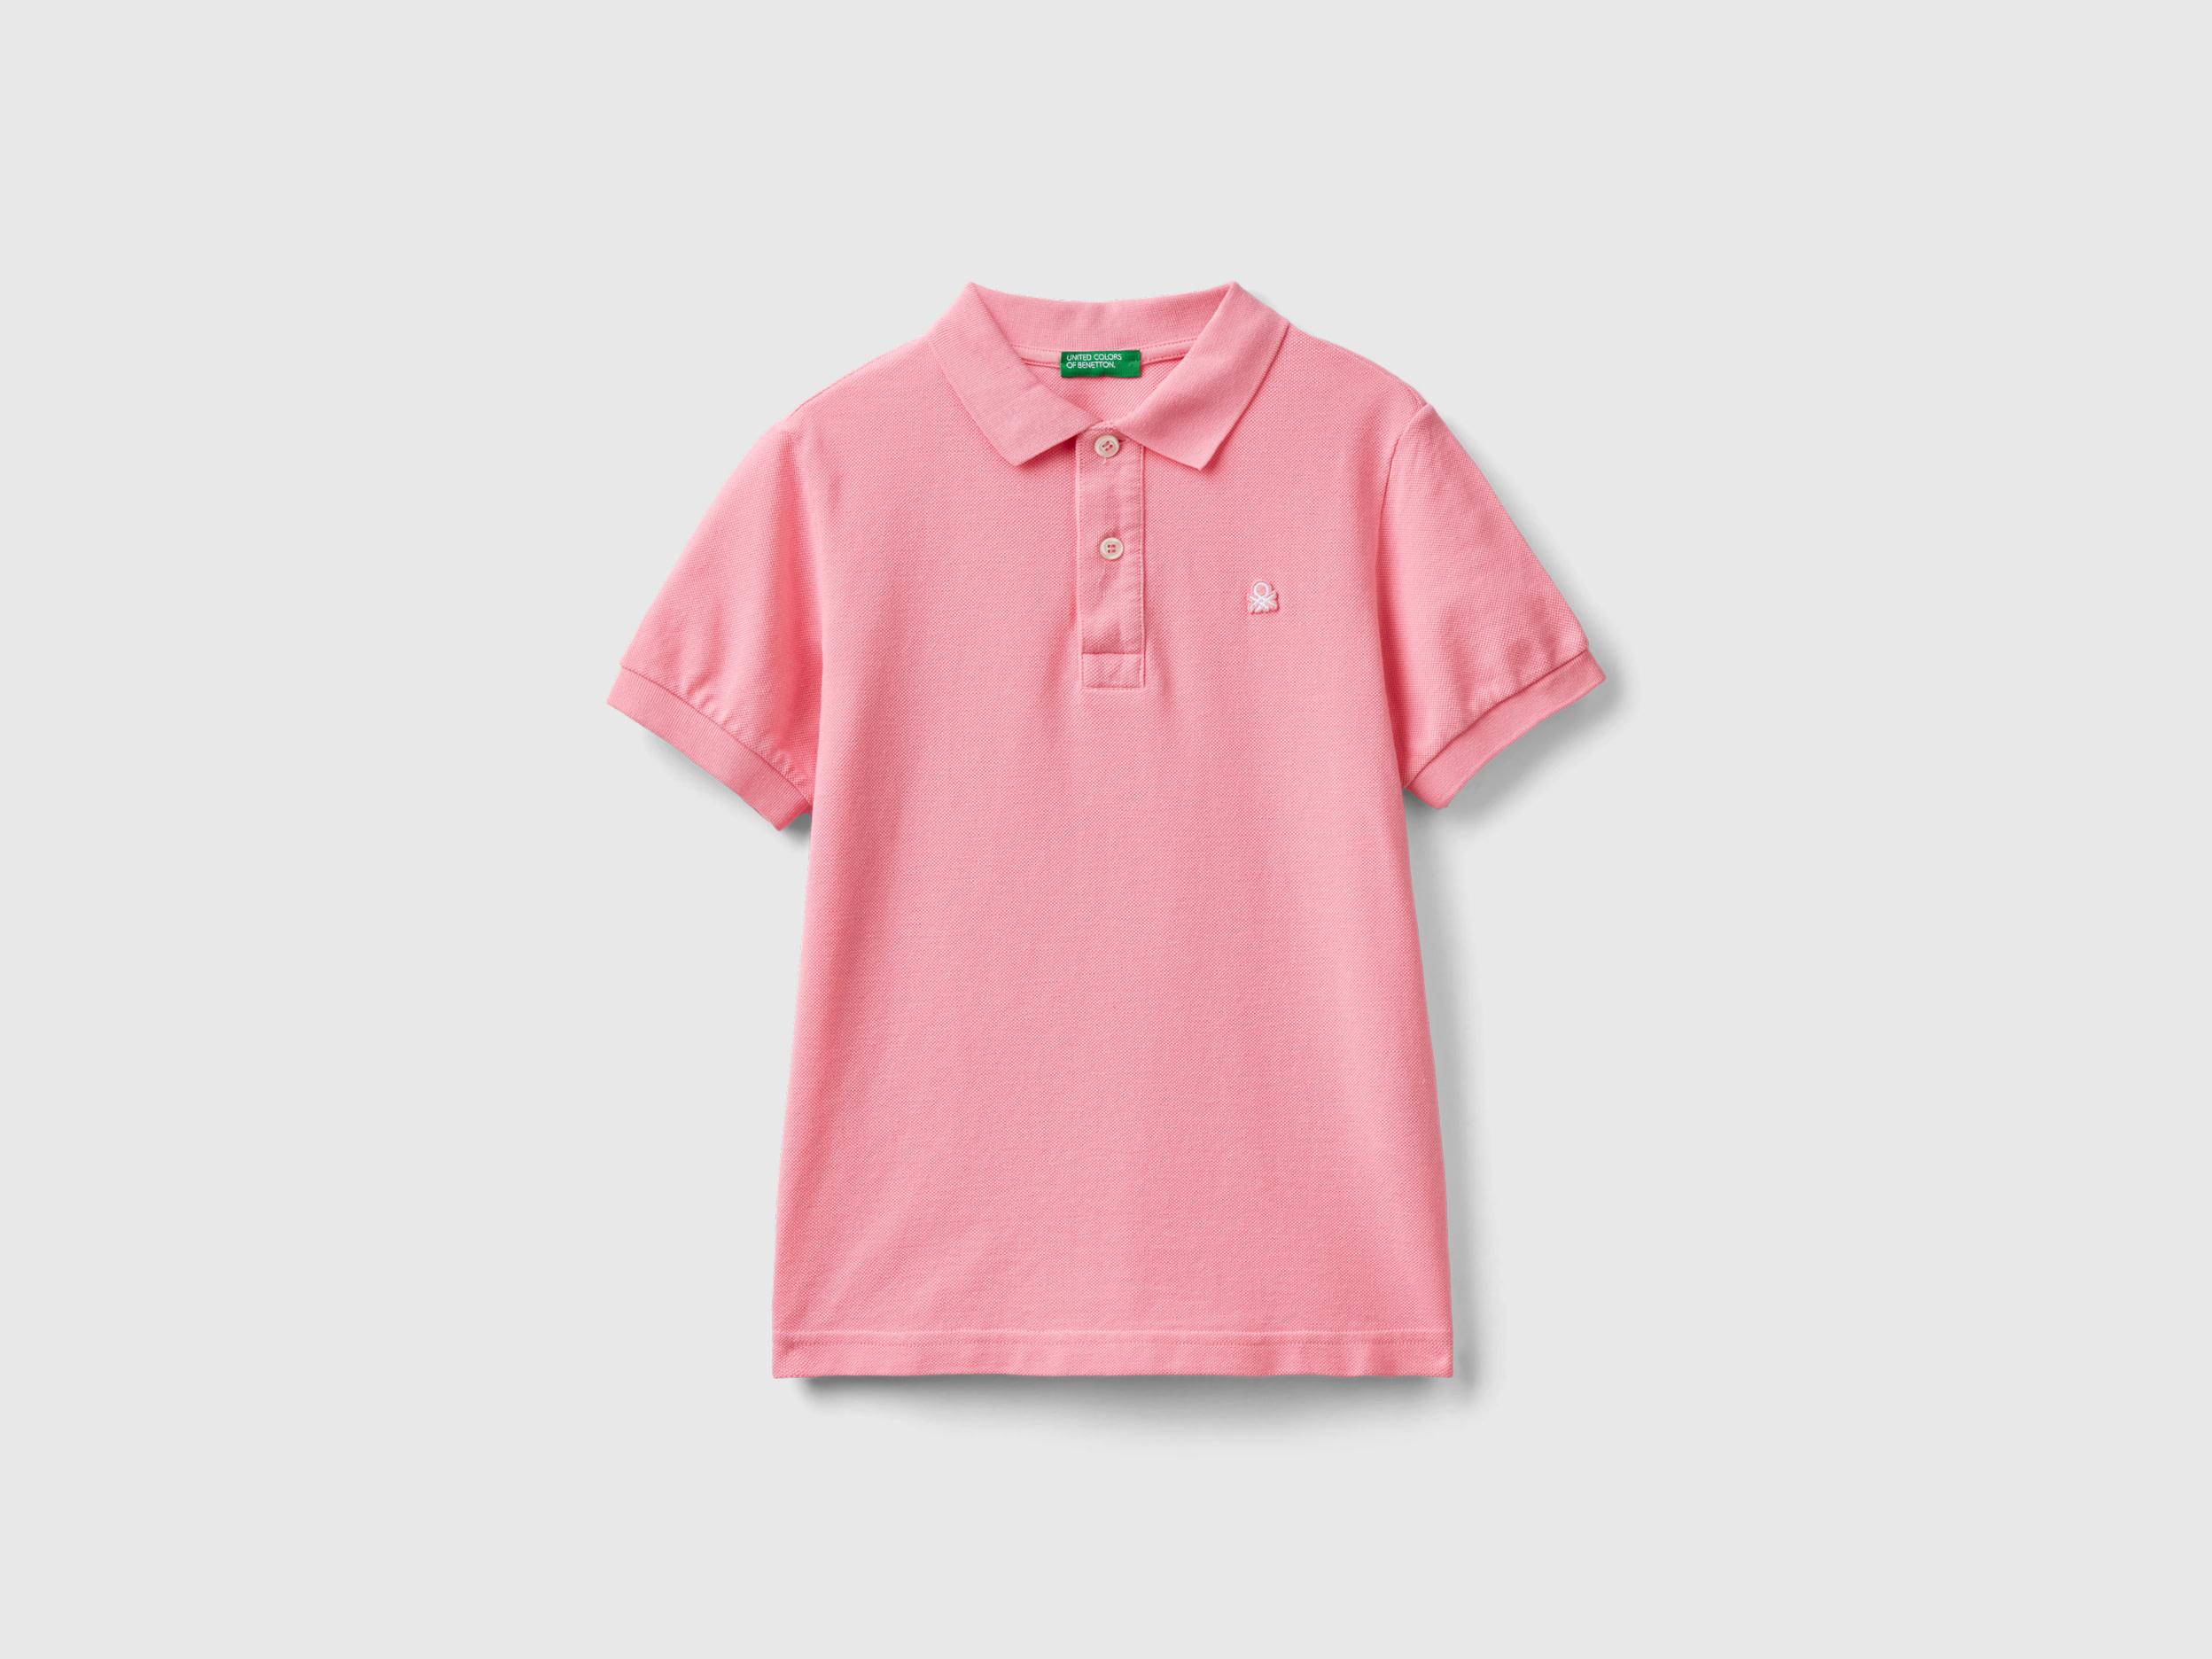 Image of Benetton, Slim Fit Polo In 100% Organic Cotton, size 3XL, Pink, Kids